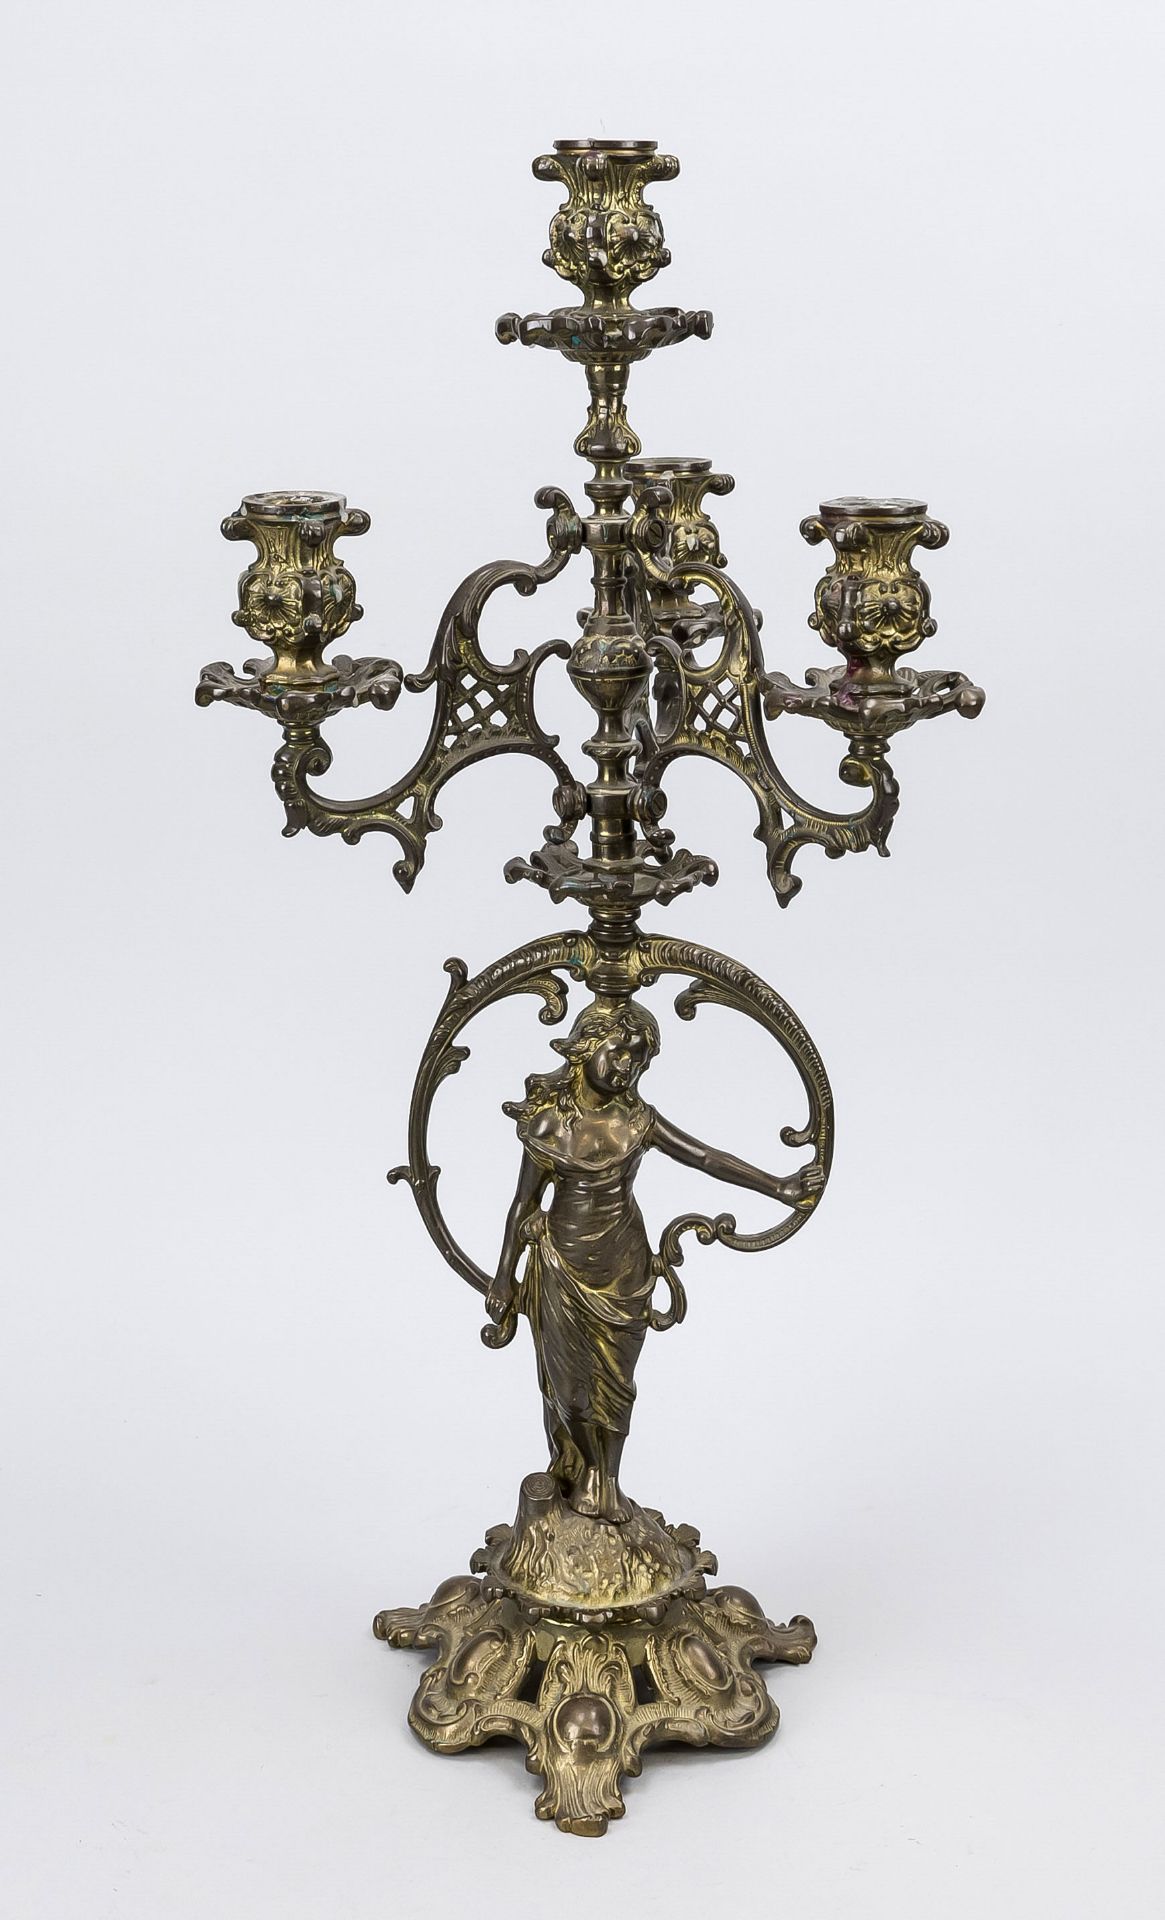 Figural candlestick, late 19th century, bronze with residual gilding. Openwork base, vase nozzles,